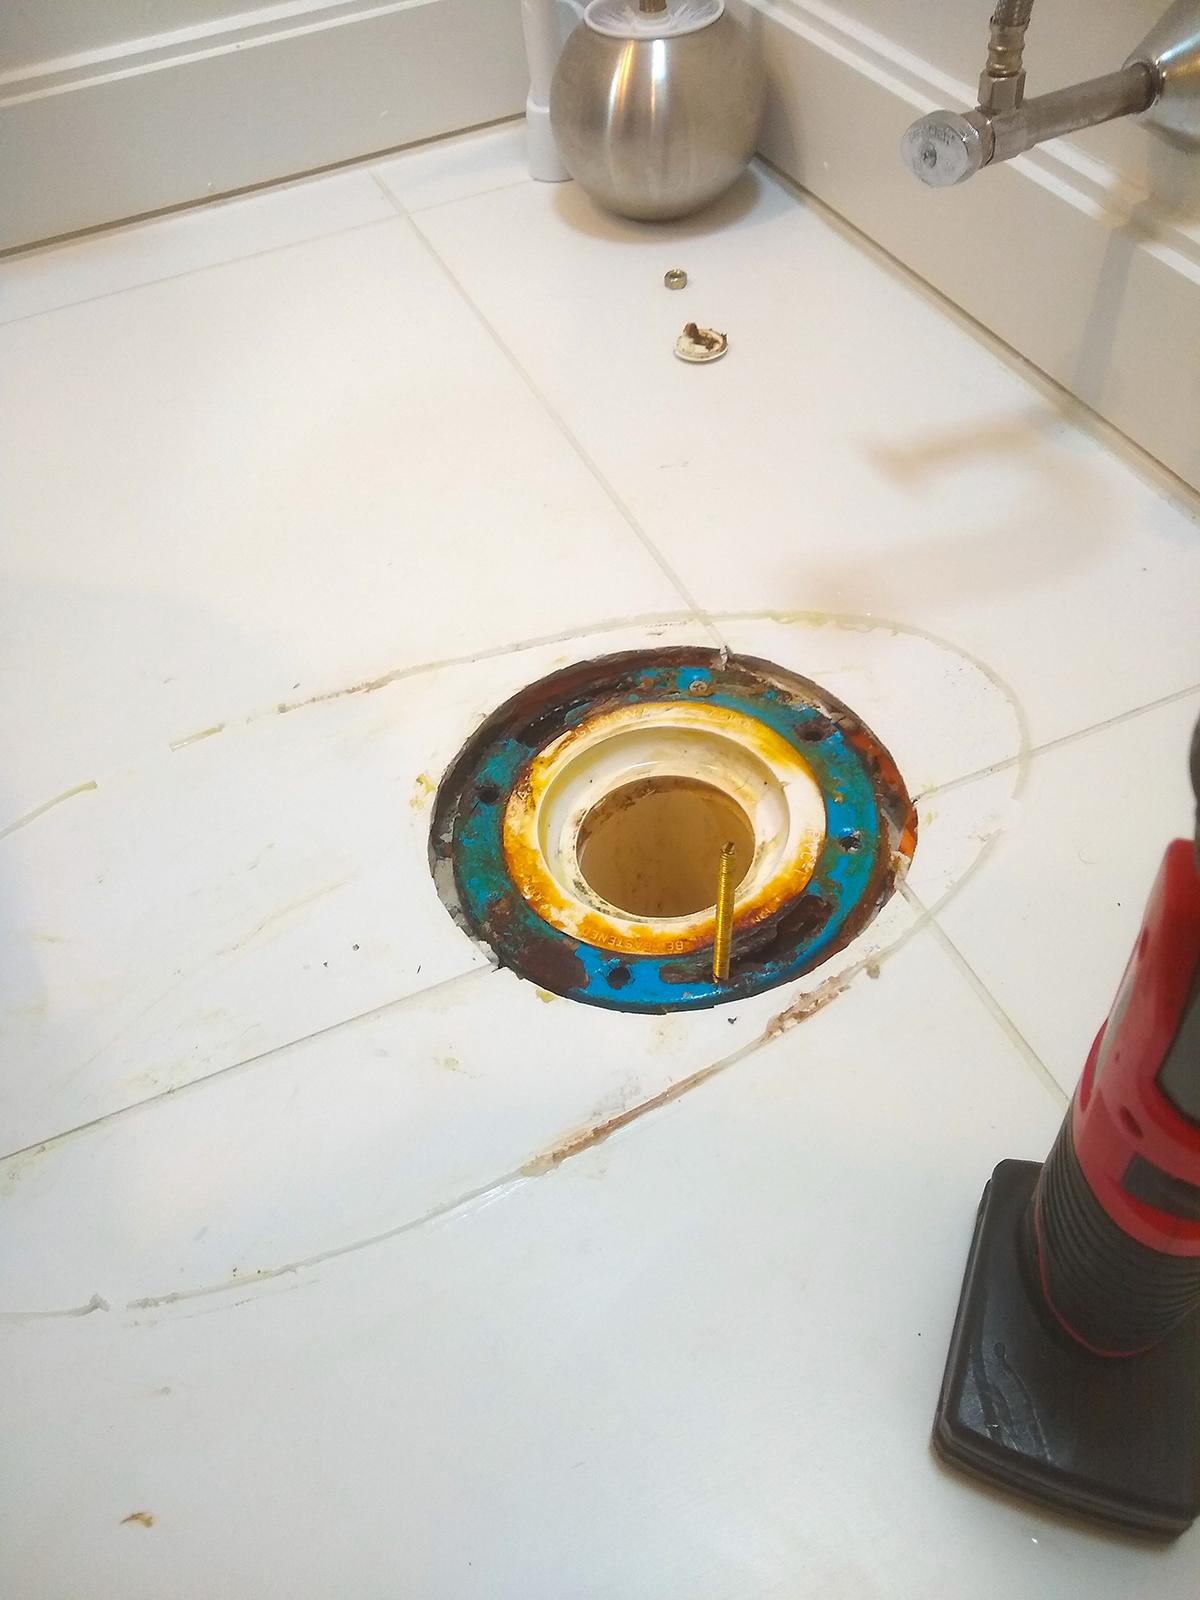 New flooring installed over old can bury a toilet flange, as pictured here. Don't assume that your flooring contractor knows how to reseat a toilet after a job like this. (Tim Carter/Tribune Content Agency/TNS)